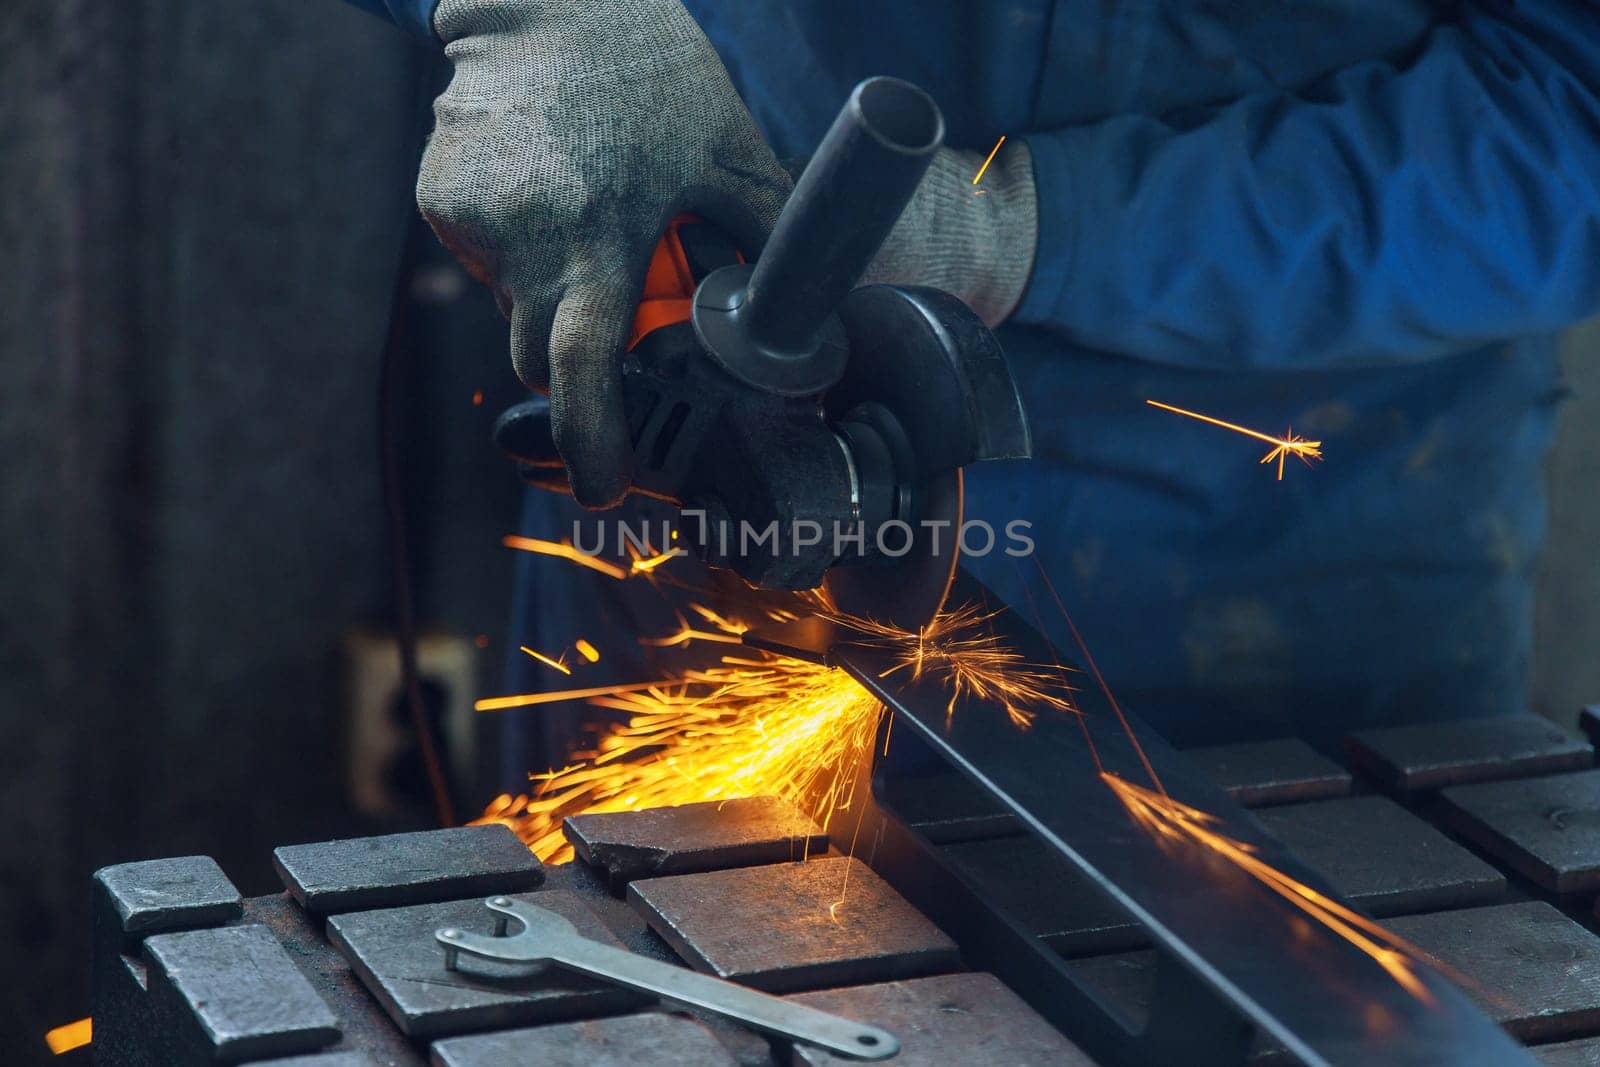 Metalwork workplace has master grinding metal an electric spark is generated as he grinds metal in factory